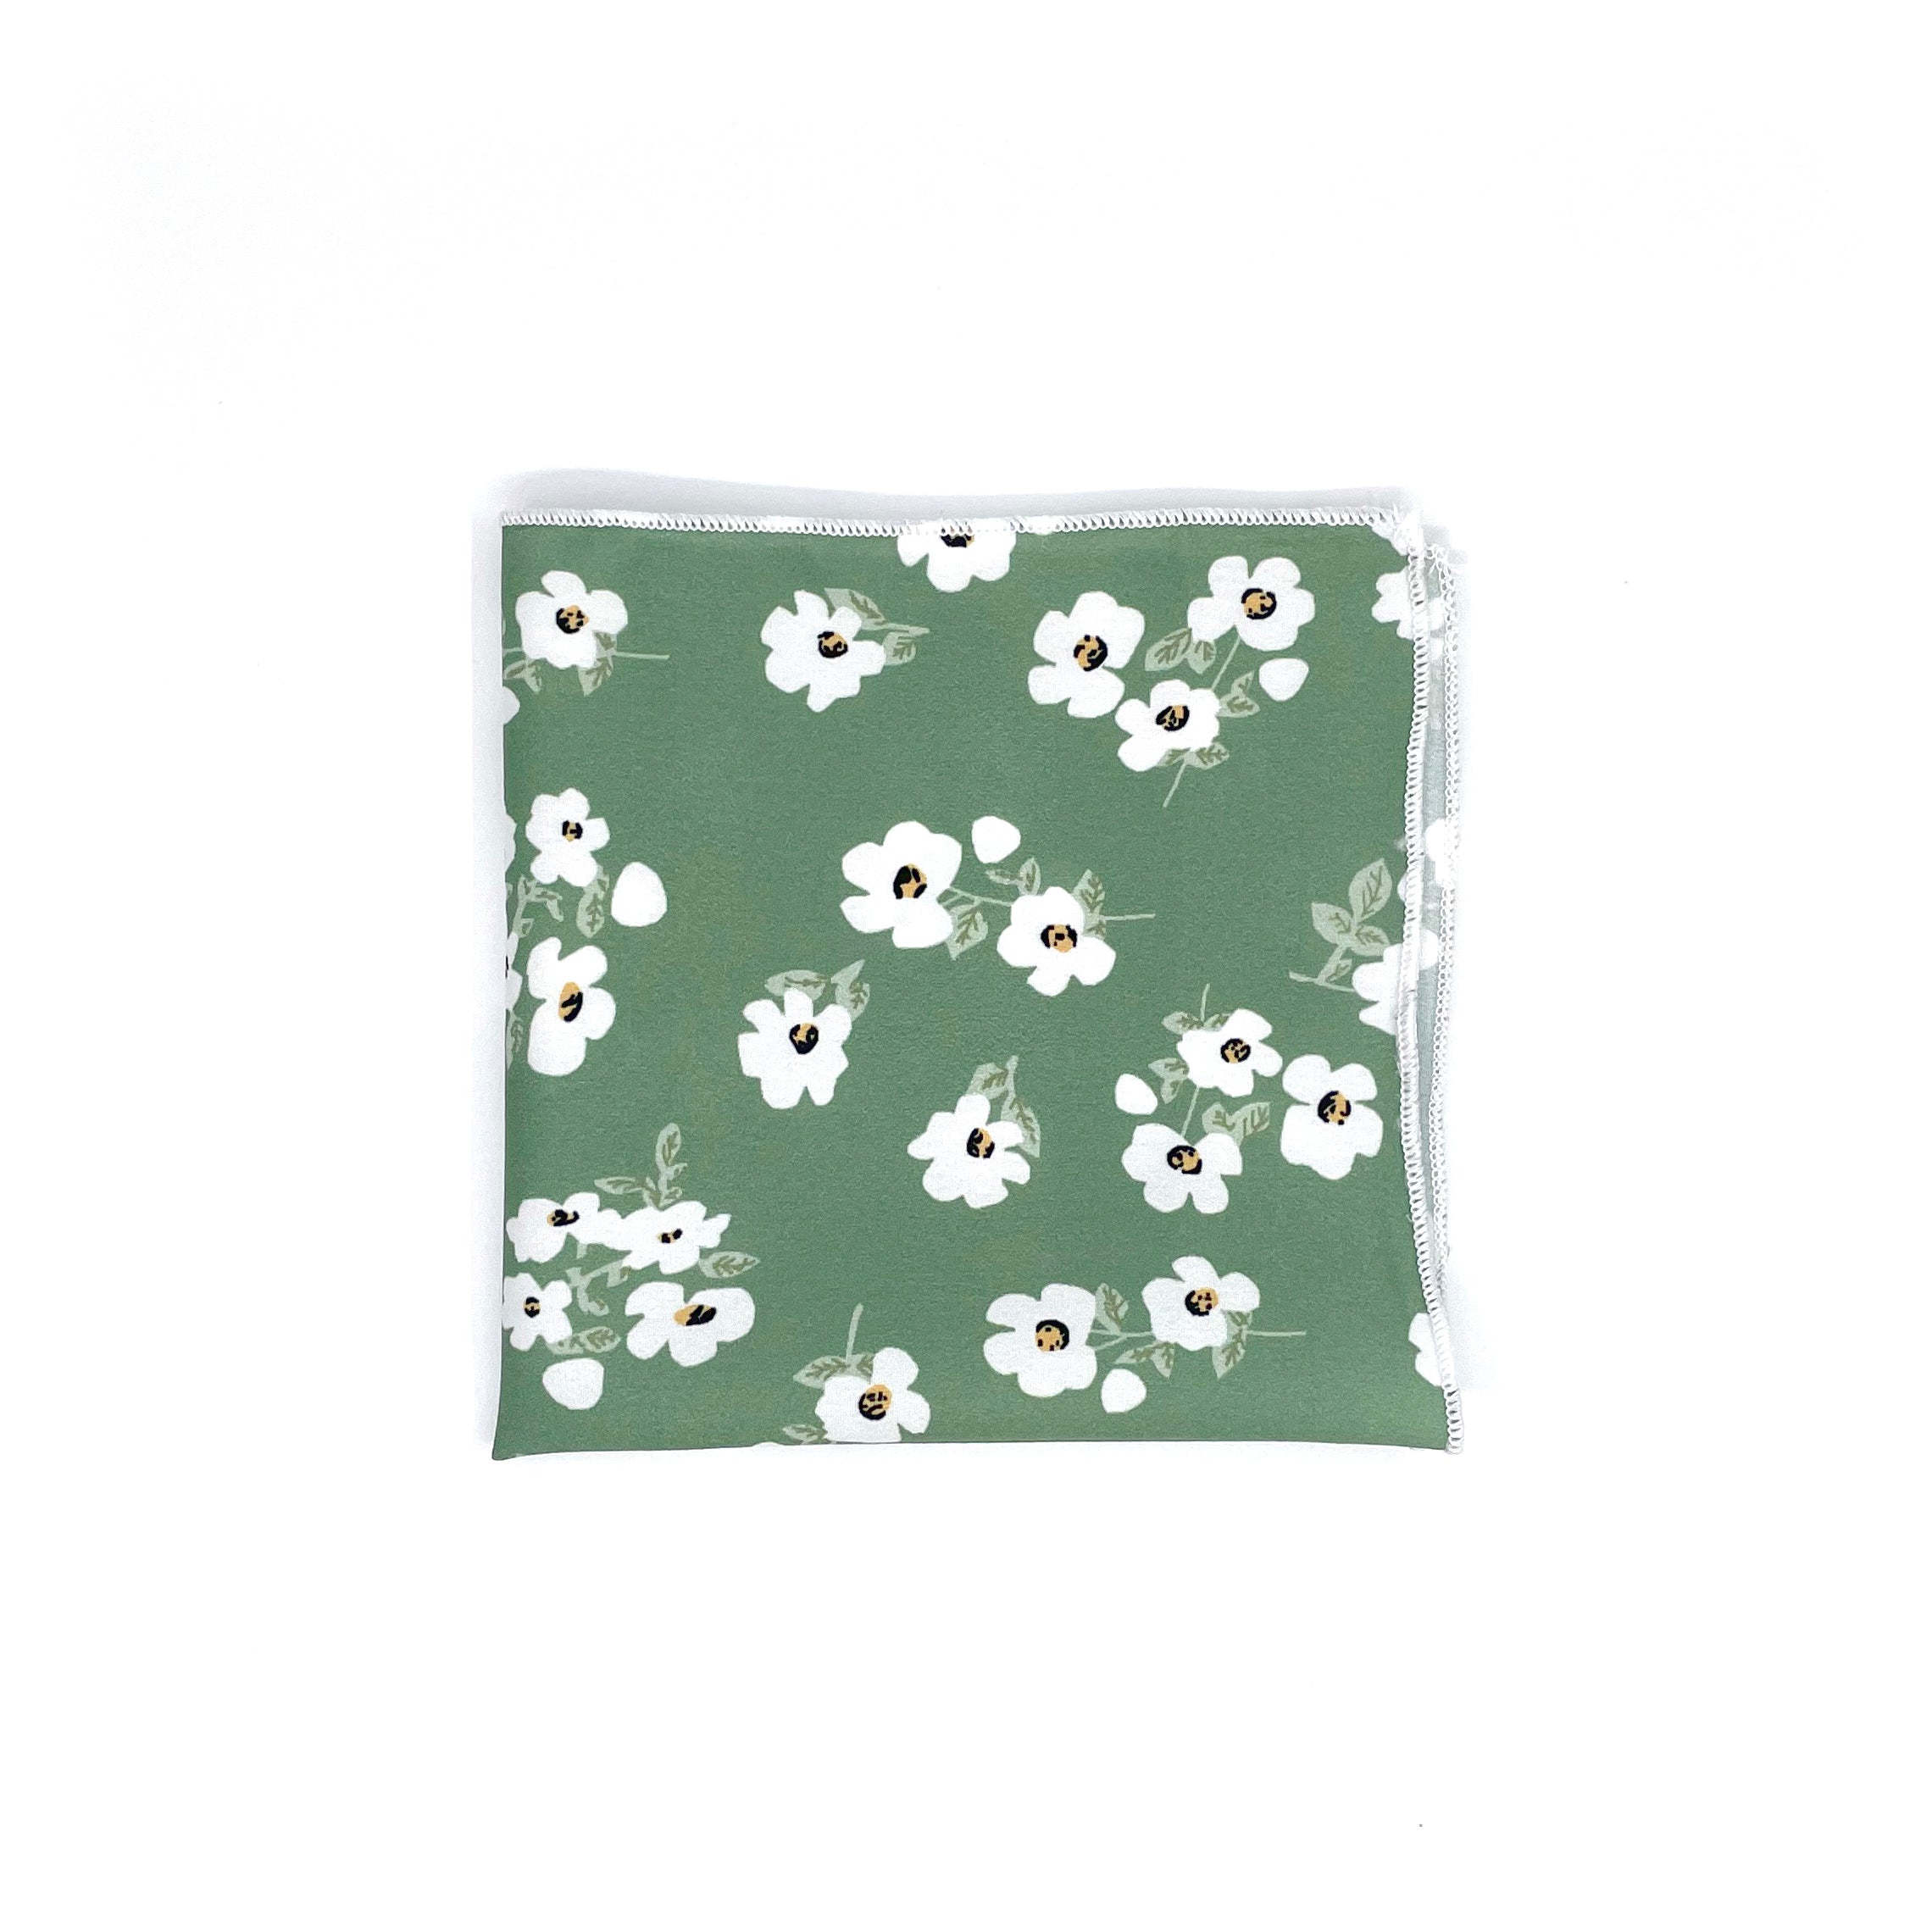 Sage Green Floral Pocket Square AUGUST Mytieshop Sage Green Floral Pocket square Color: Green Item Length: 23 cm ( 9 inches)Item Width : 22 cm (8.6 inches) Matching Necktie Add a touch of elegance to your look with this AUGUST Floral Pocket Square. Made with high-quality fabric, as a result this pocket square is perfect for any formal occasion. The beautiful floral design is sure to make you stand out from the crowd, and whether you&#39;re attending a wedding, a job interview, or a fancy dinner part